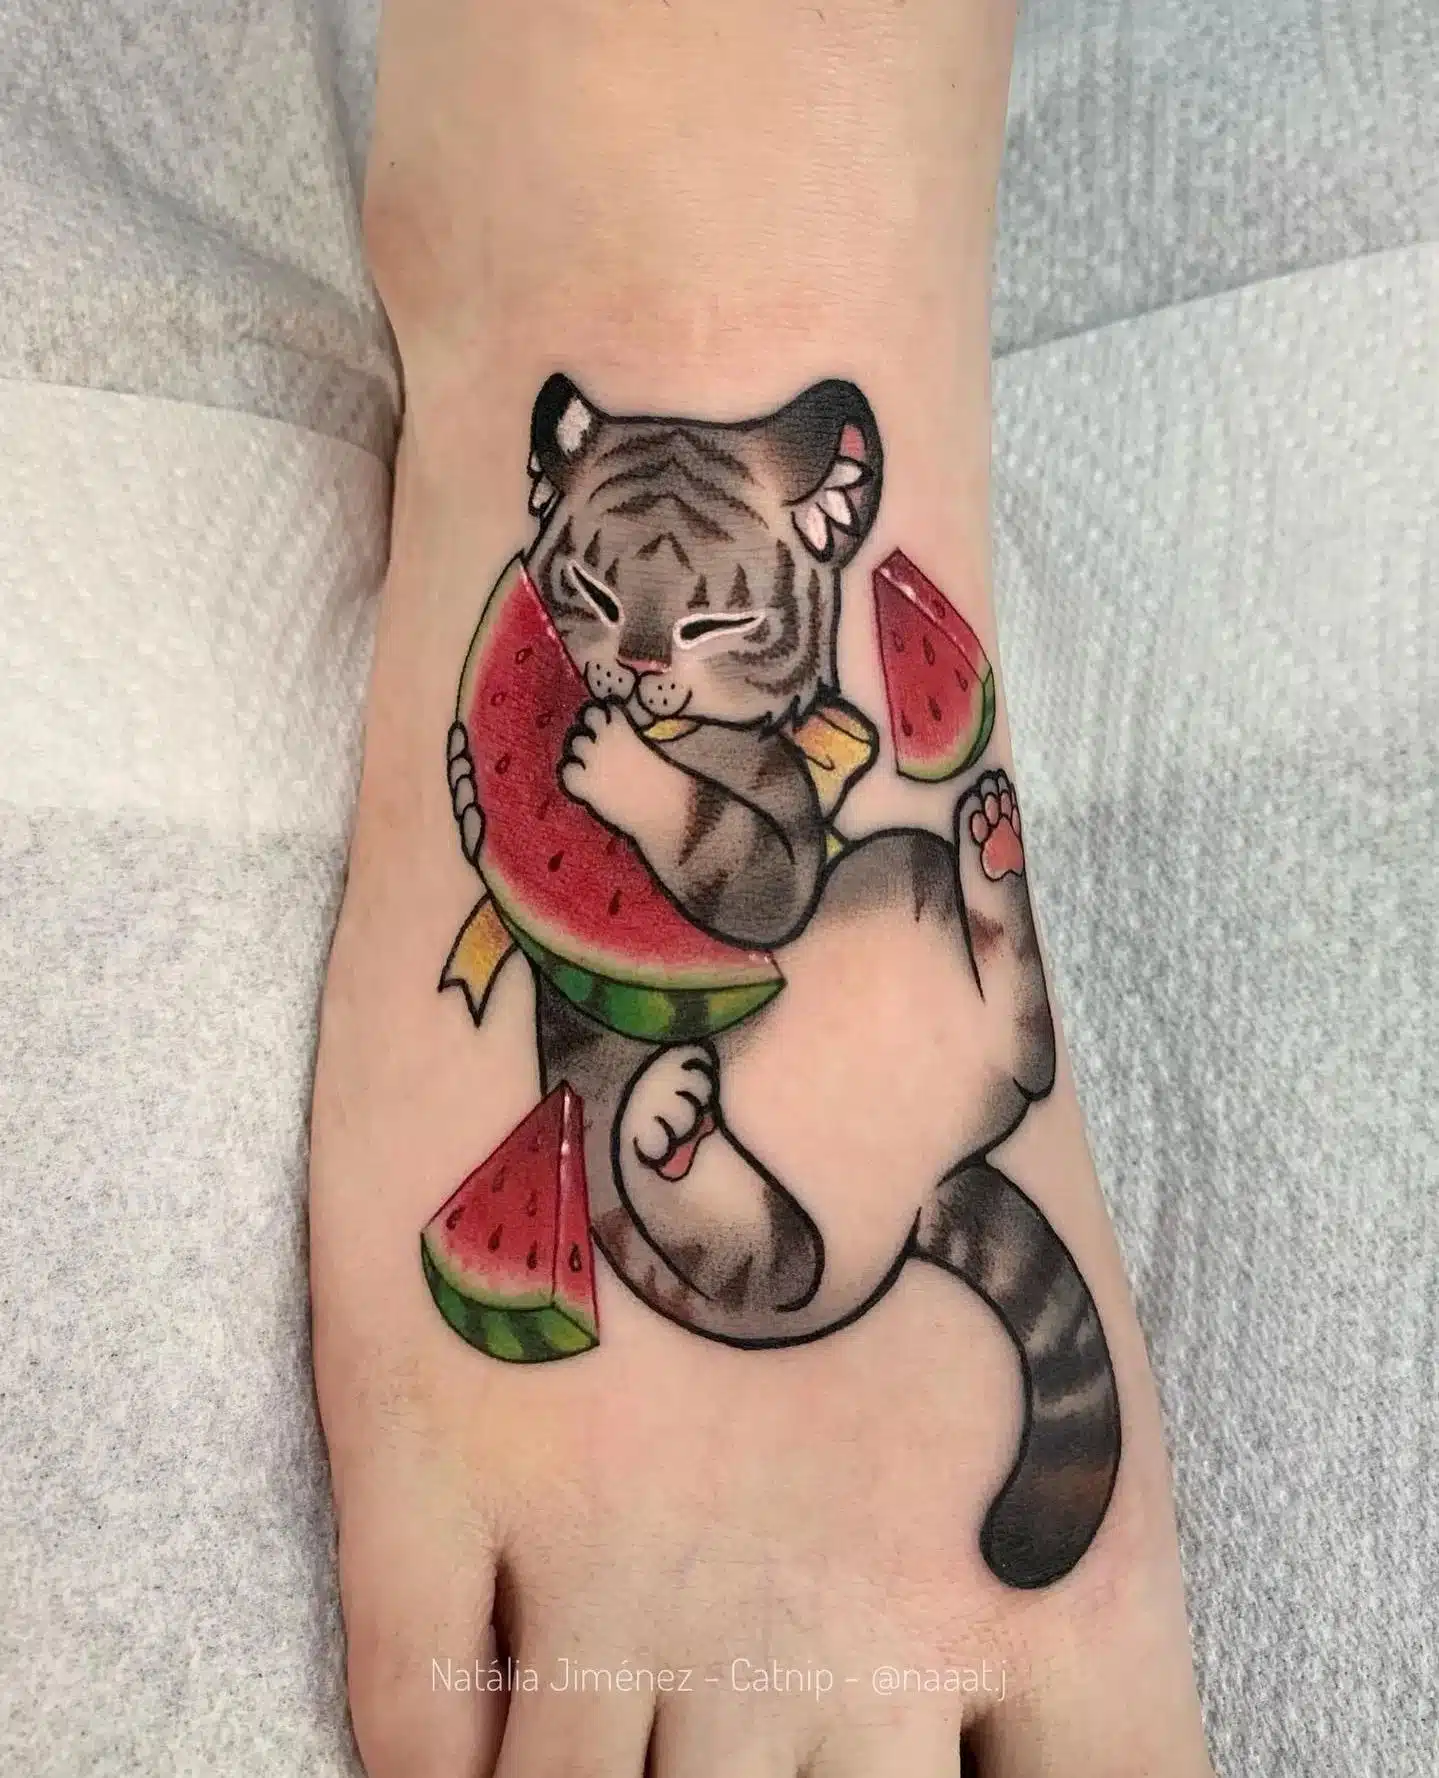 Silver tiger having a wee munch on juicy watermelon. Lovely stuff by our fabulous Natalia naaat.j !🍉❤️🐯

                     